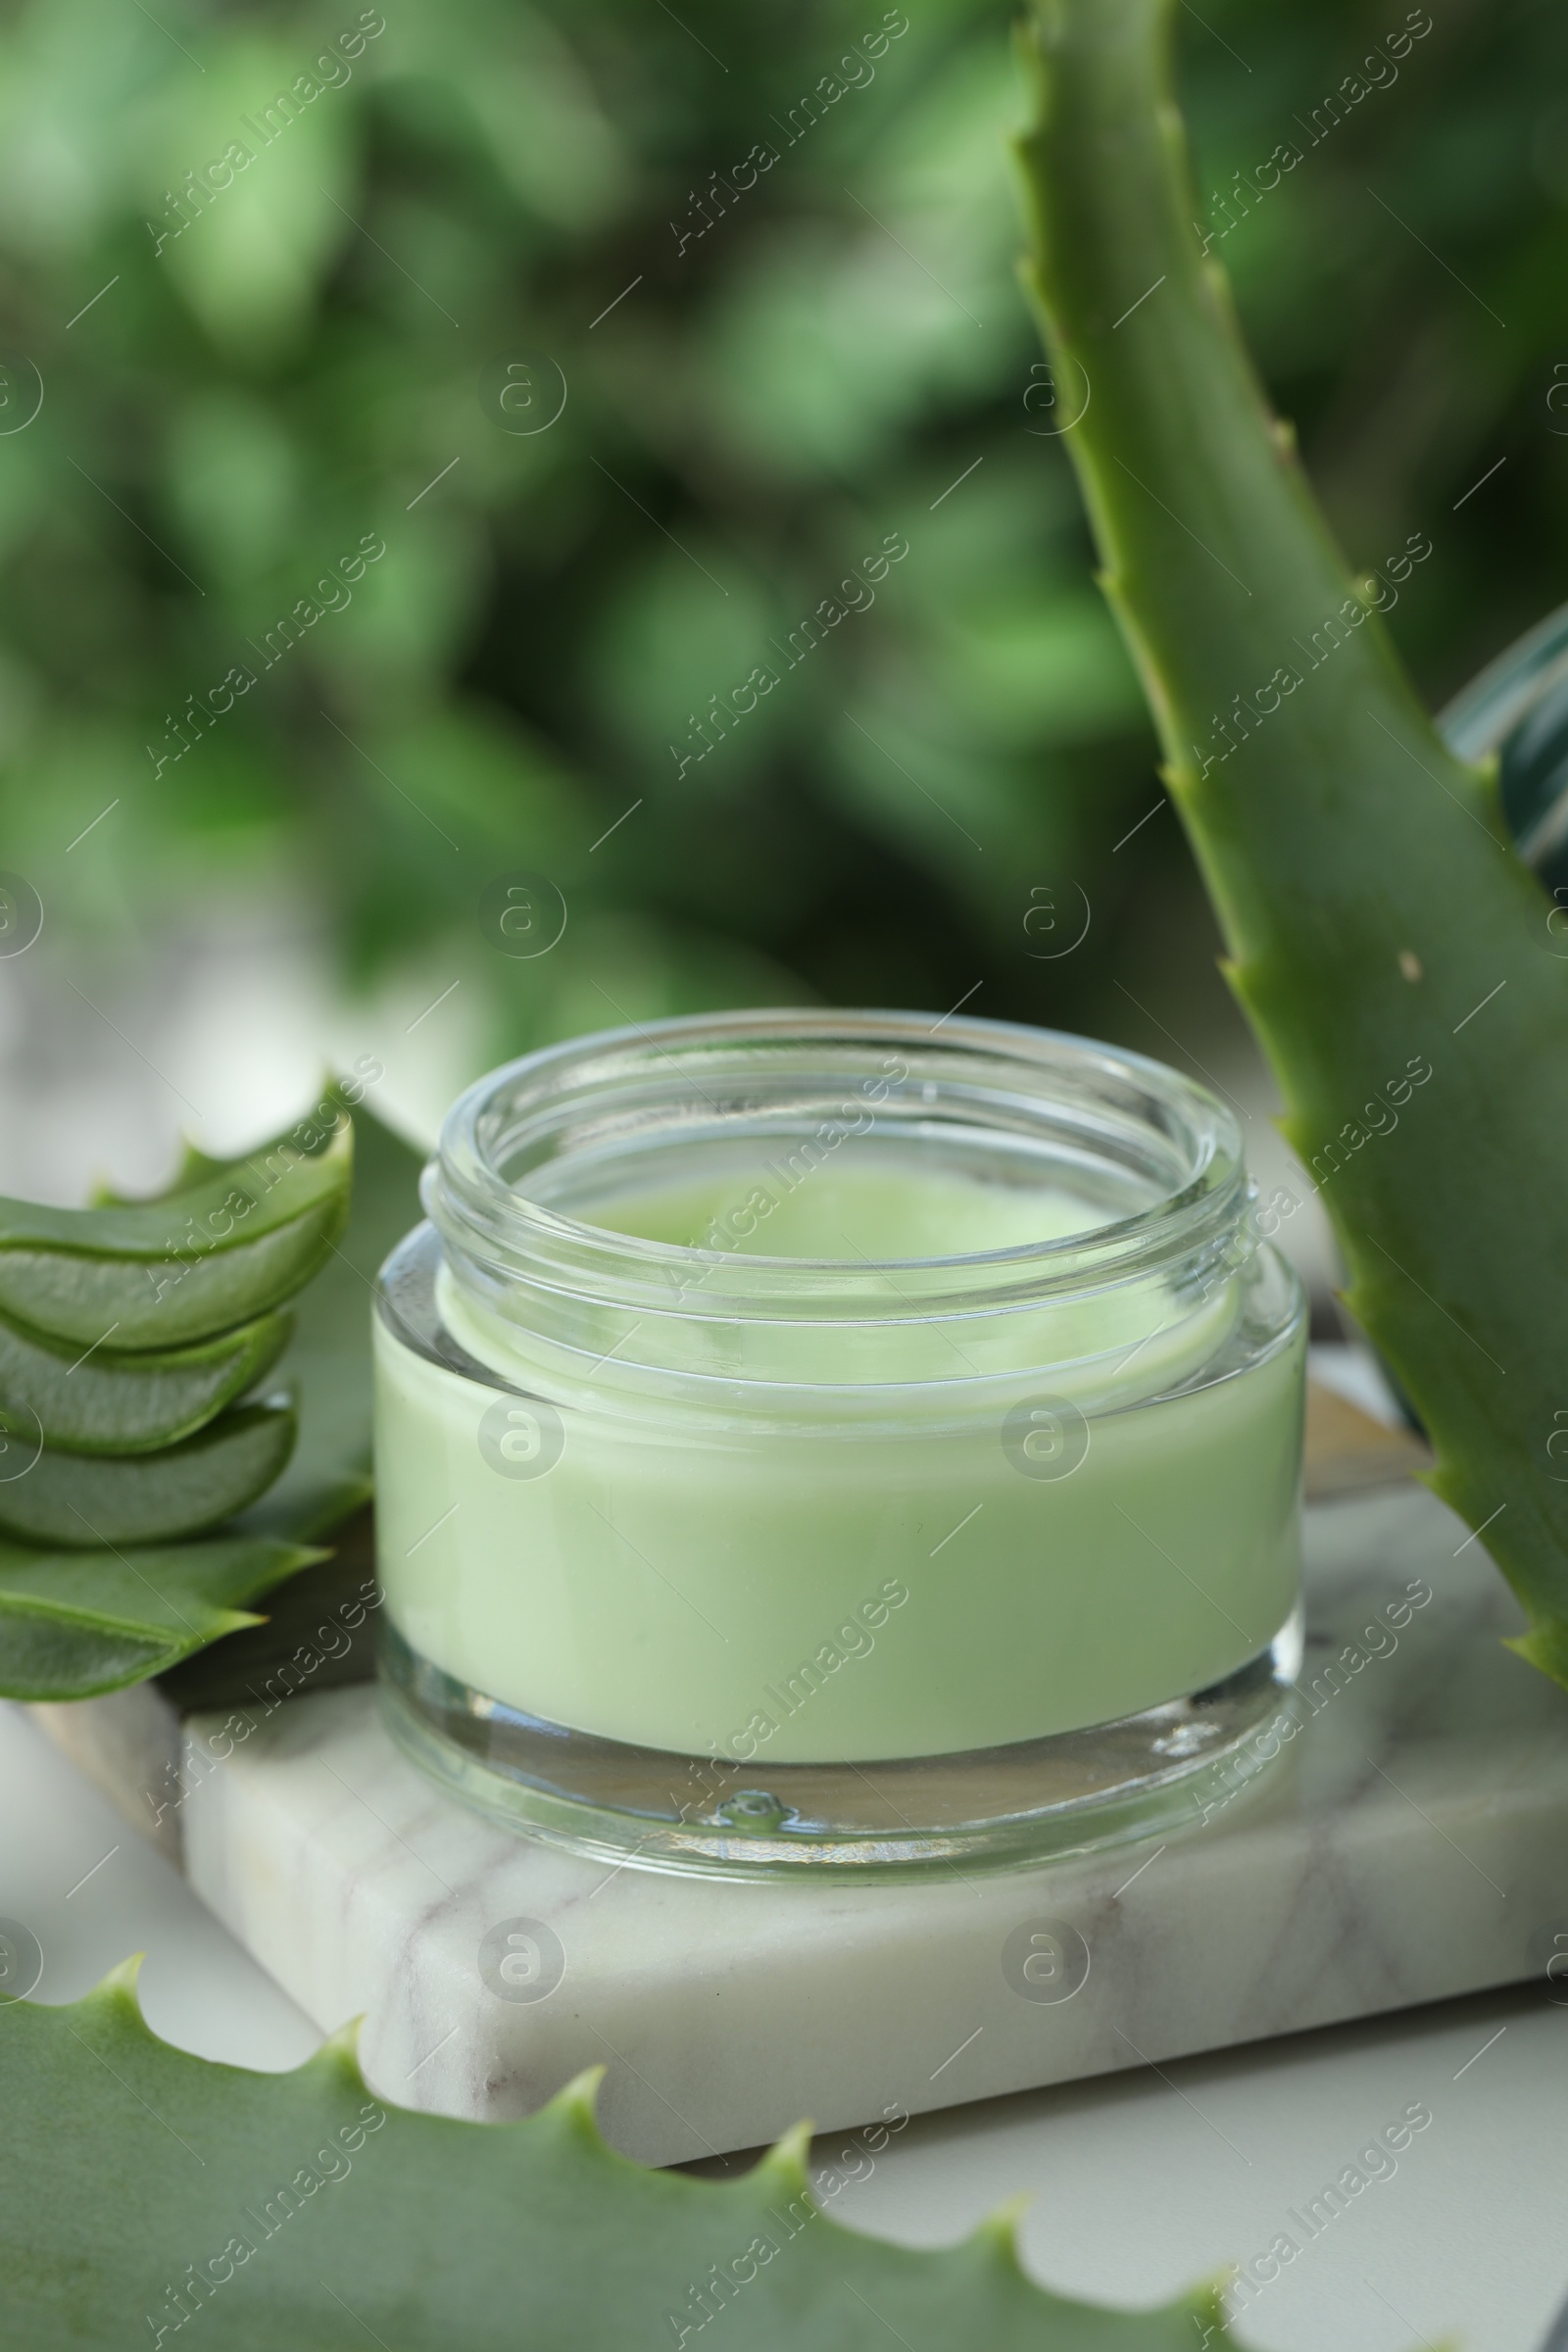 Photo of Jar with cream and cut aloe leaves on white table against blurred green background, closeup